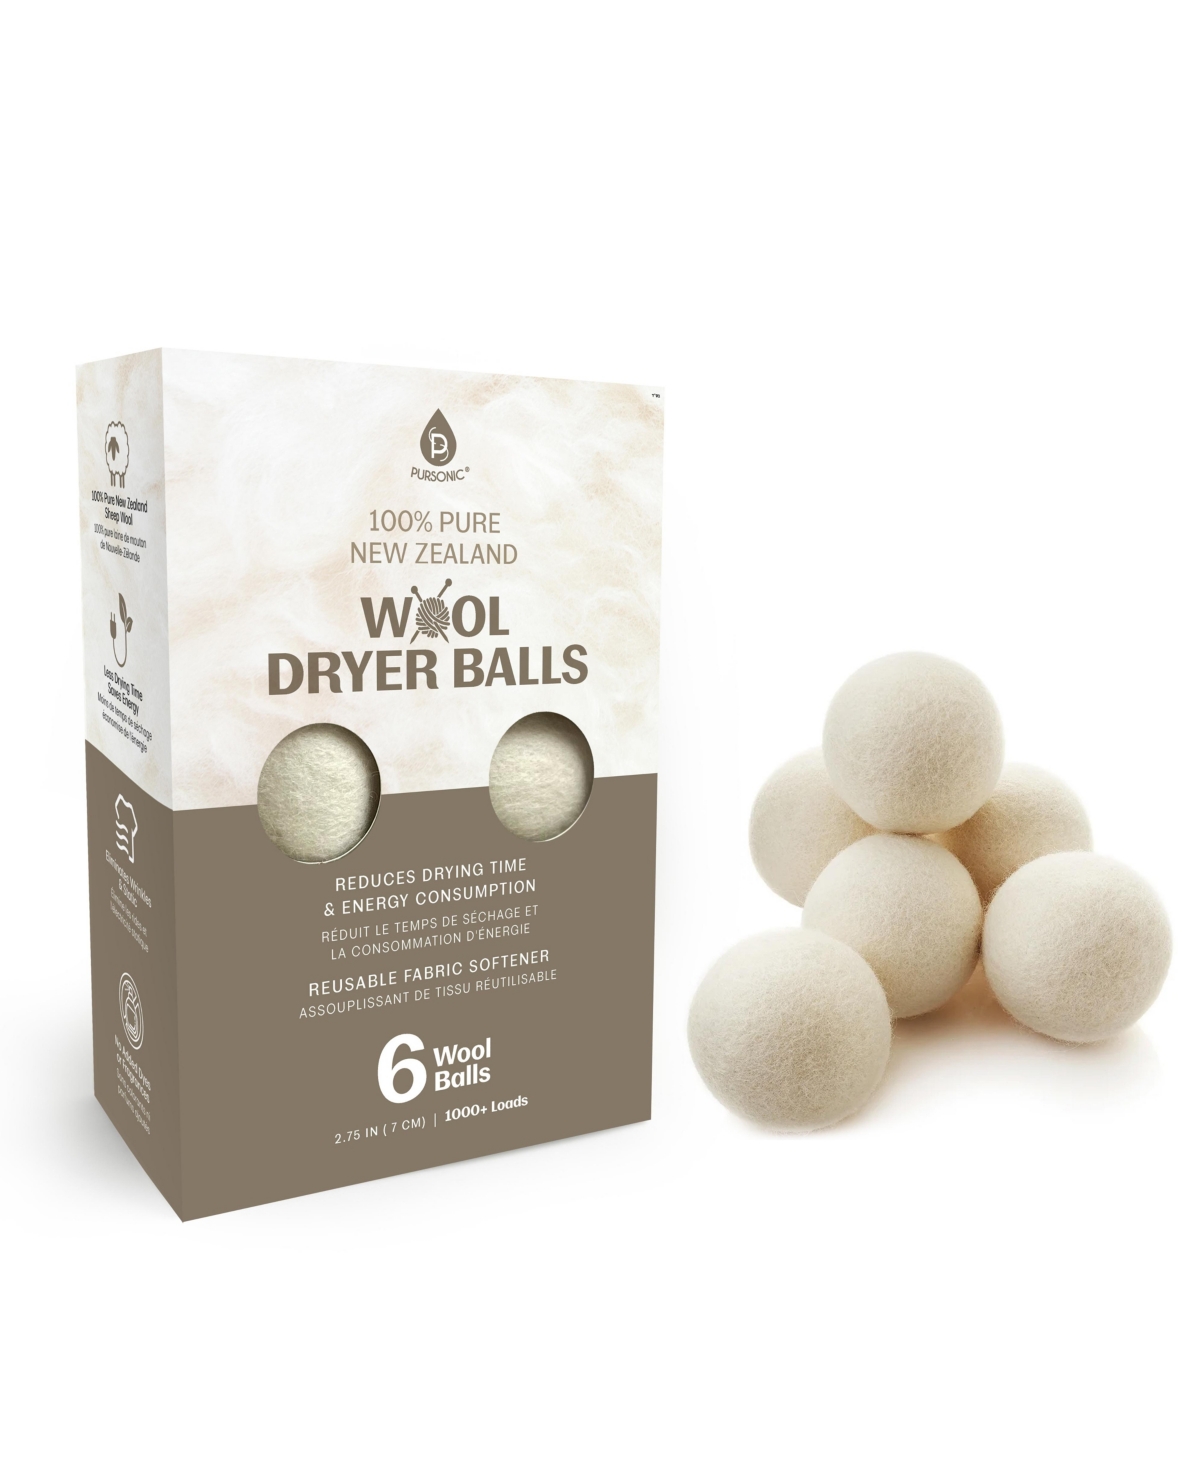 100% Pure New Zealand Wool Dryer Balls, Alternative to Dryer Sheets - Open White